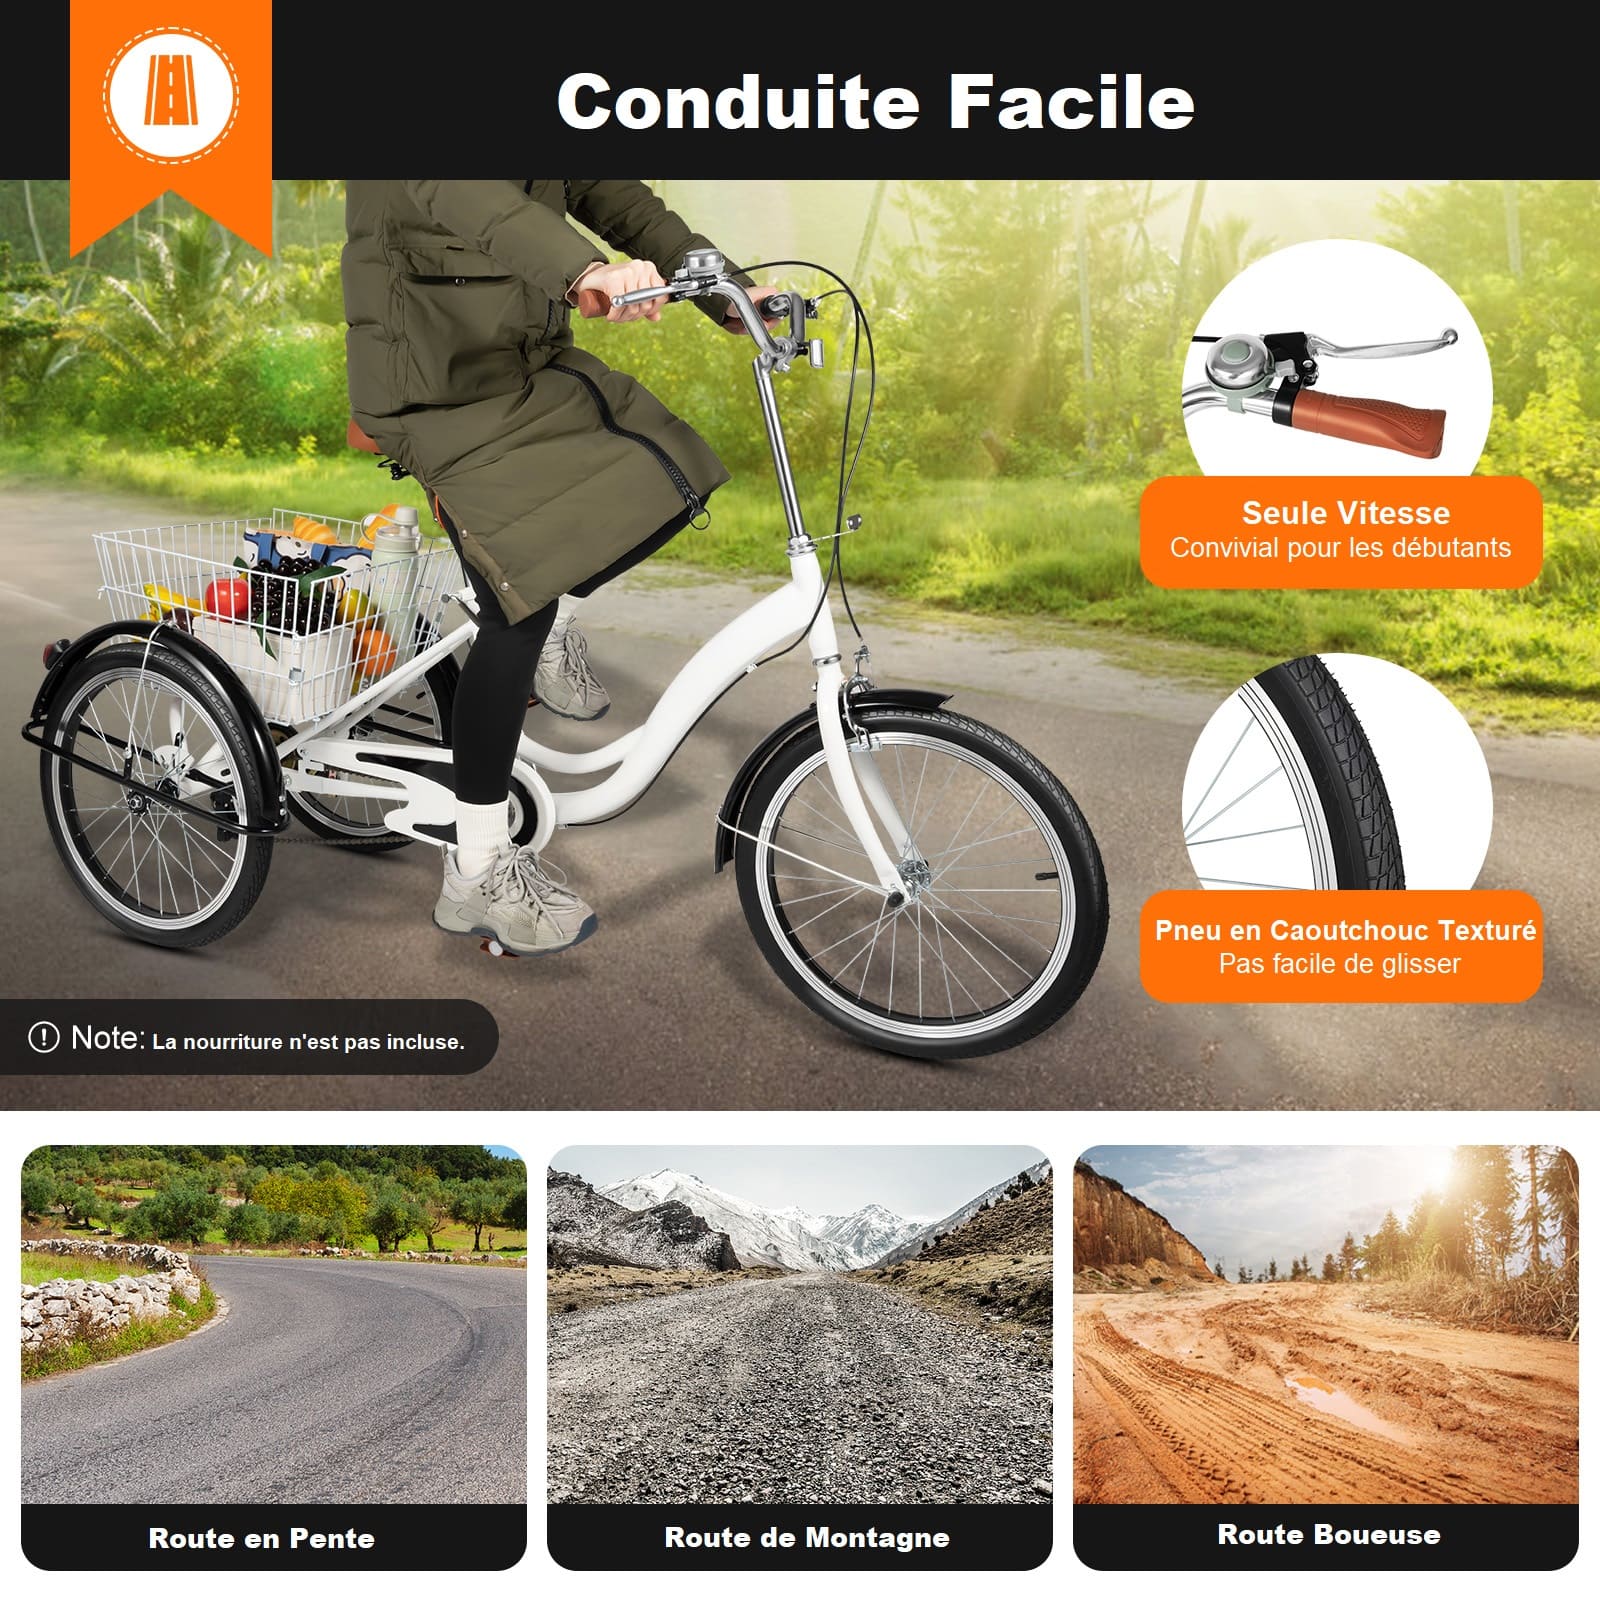 20 Pouce 3 Roues Tricycle Adulte Tricycle